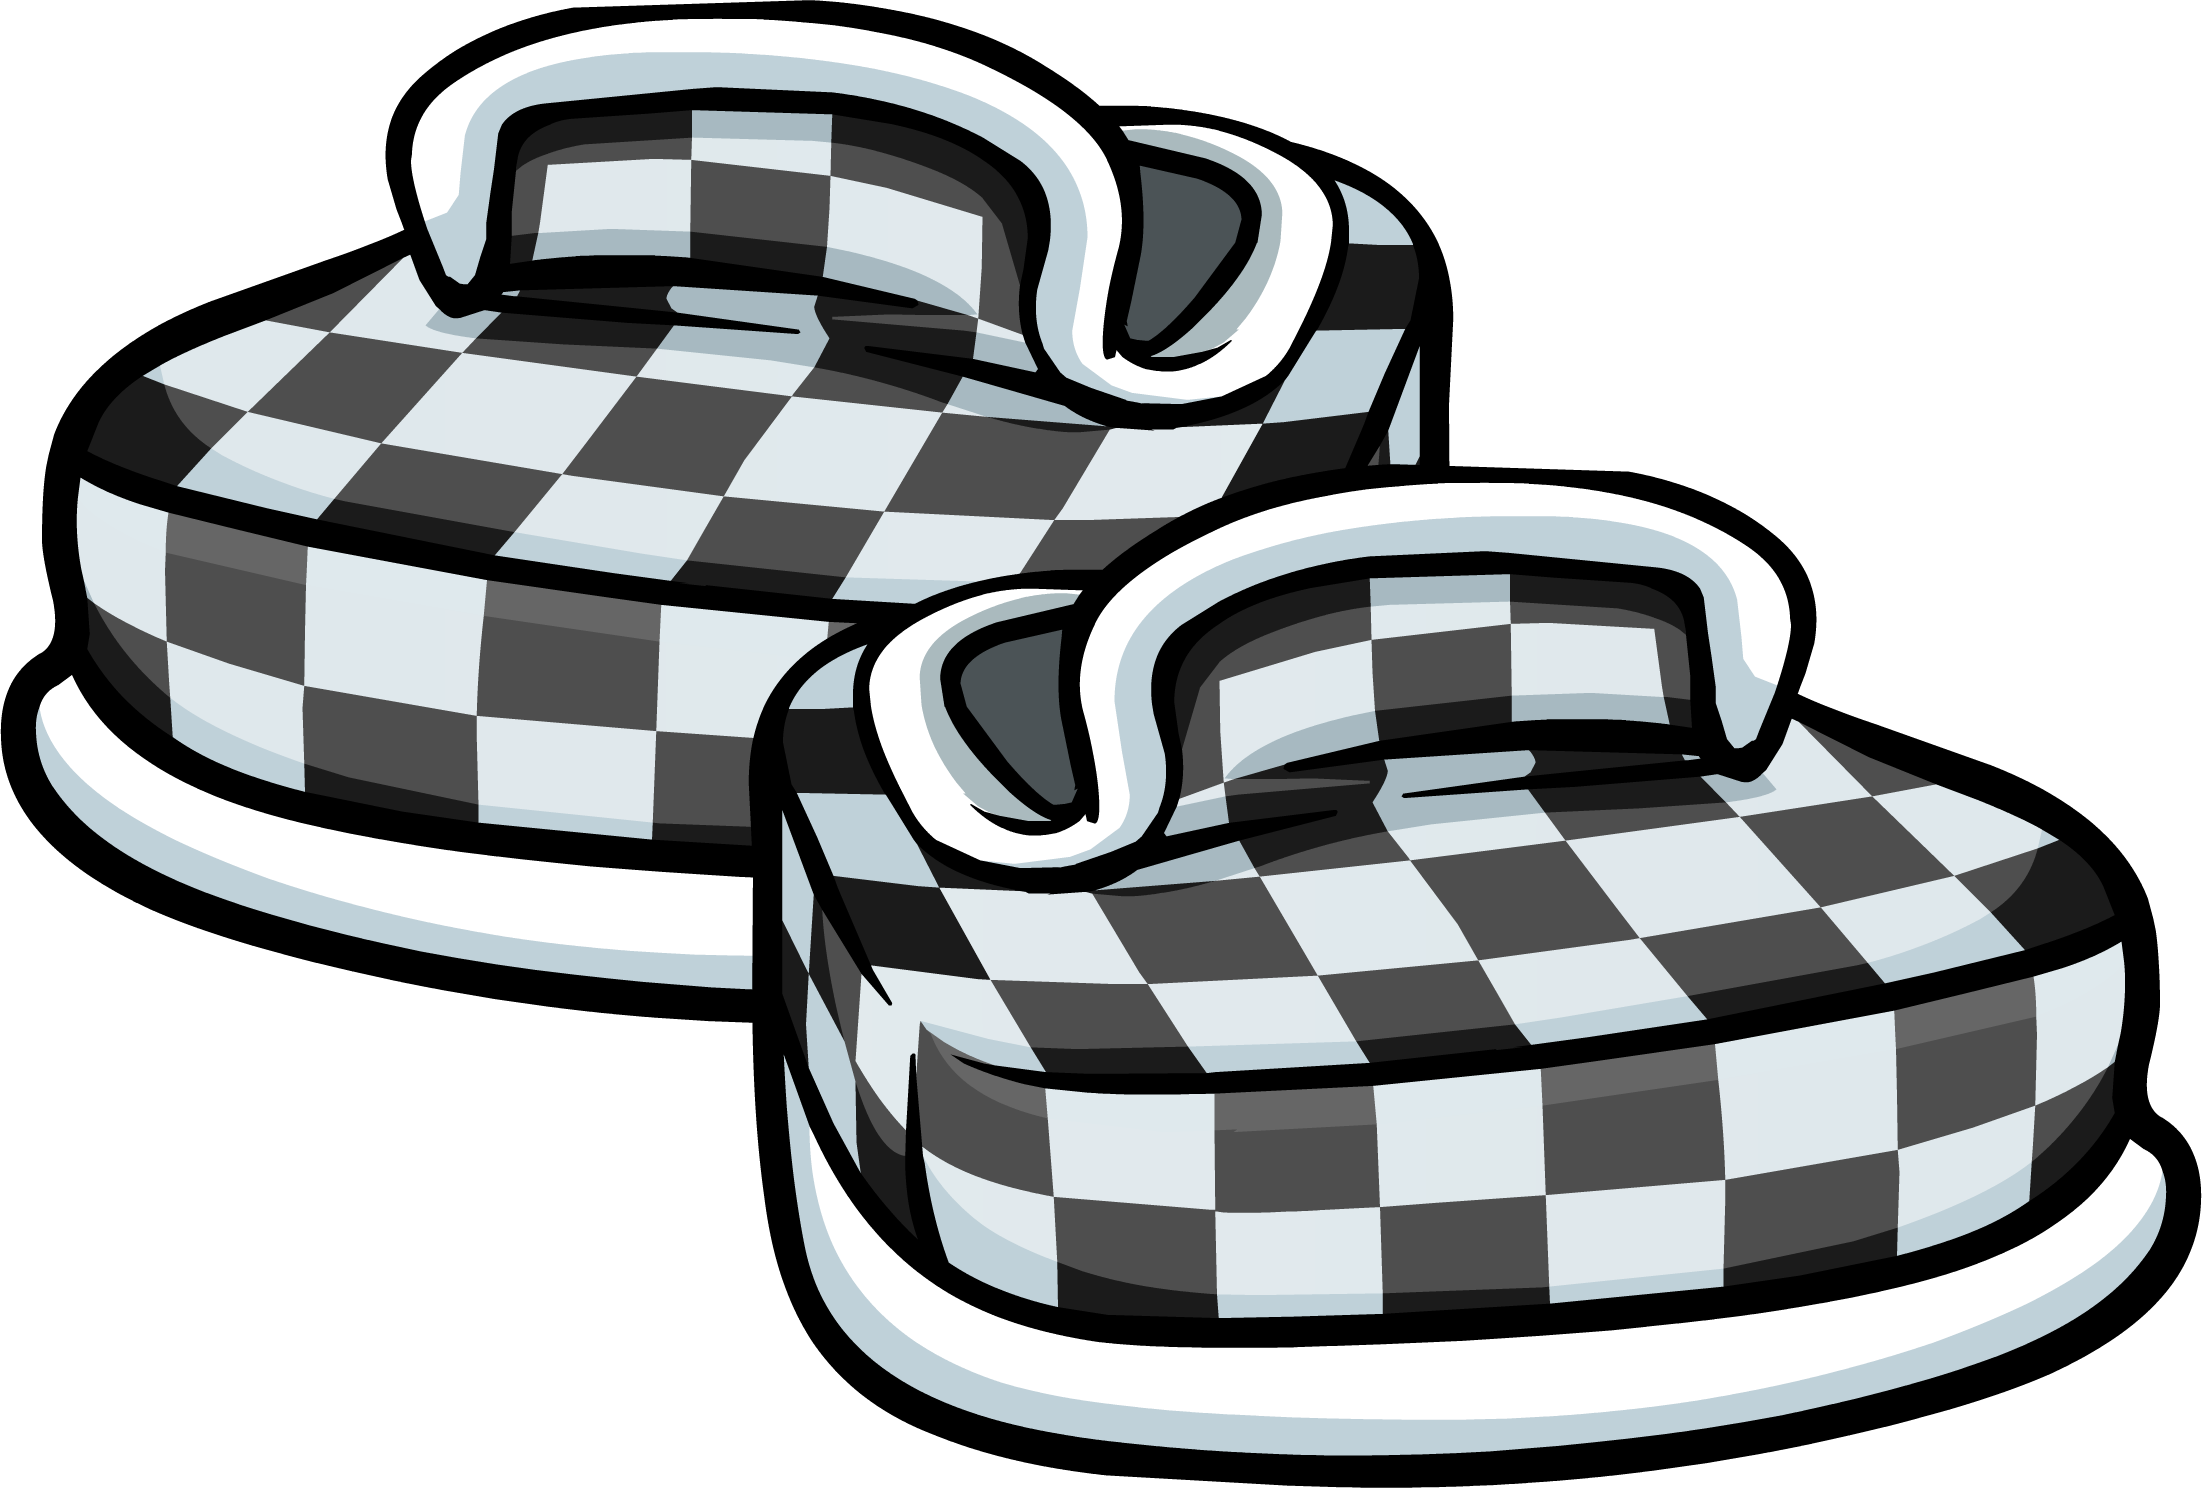 Black Checkered Shoes - Club Penguin Checkered Shoes (2202x1488)